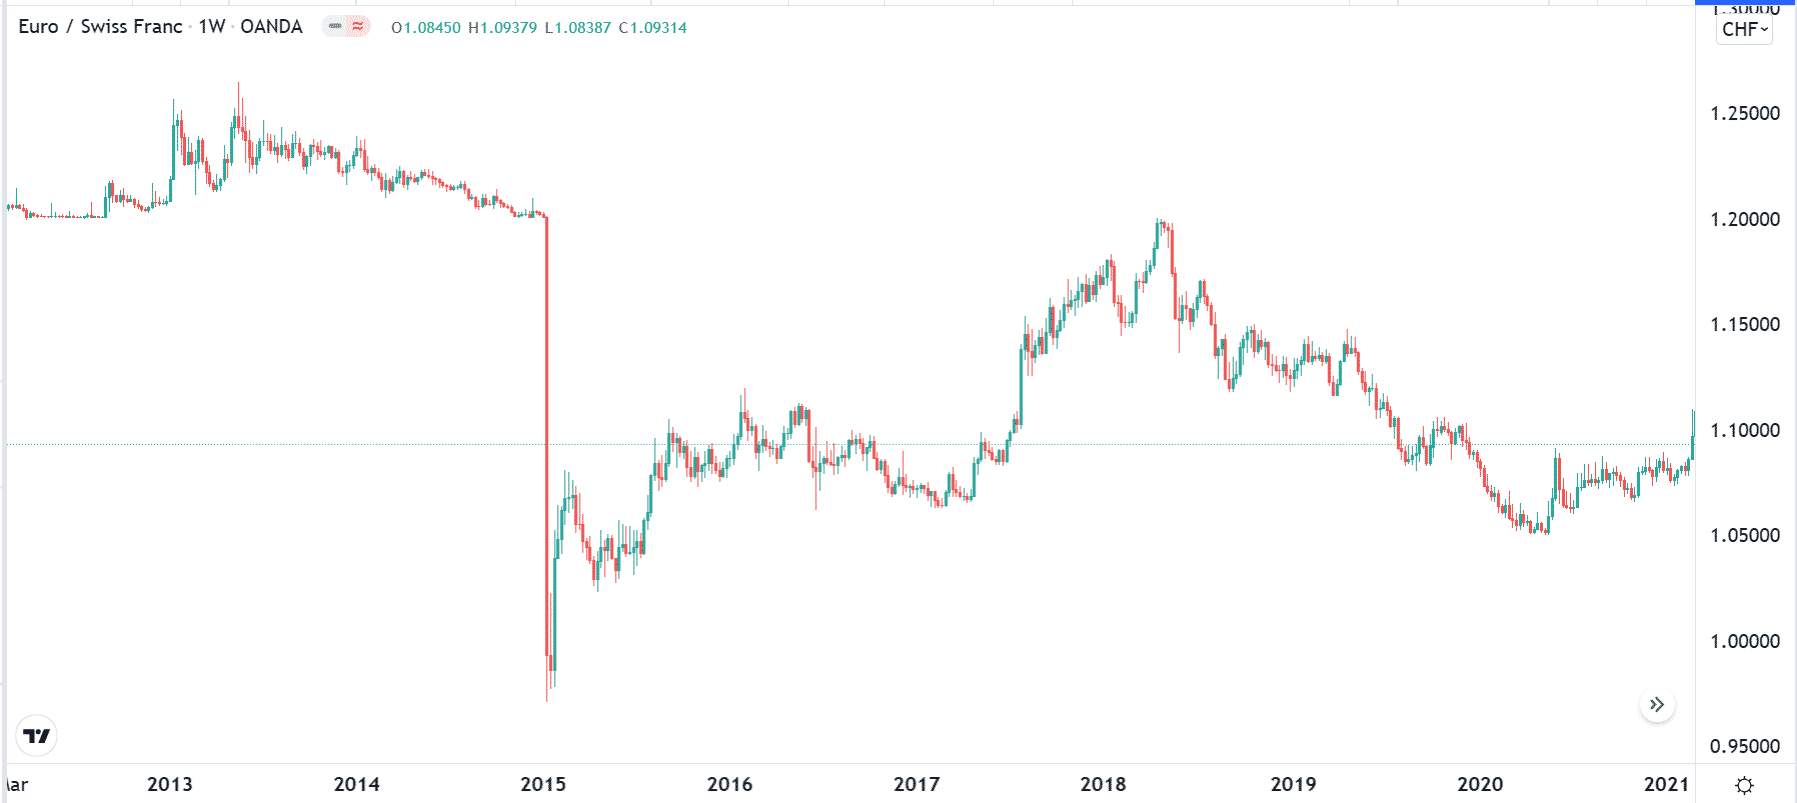 EURCHF when the SNB removed the peg